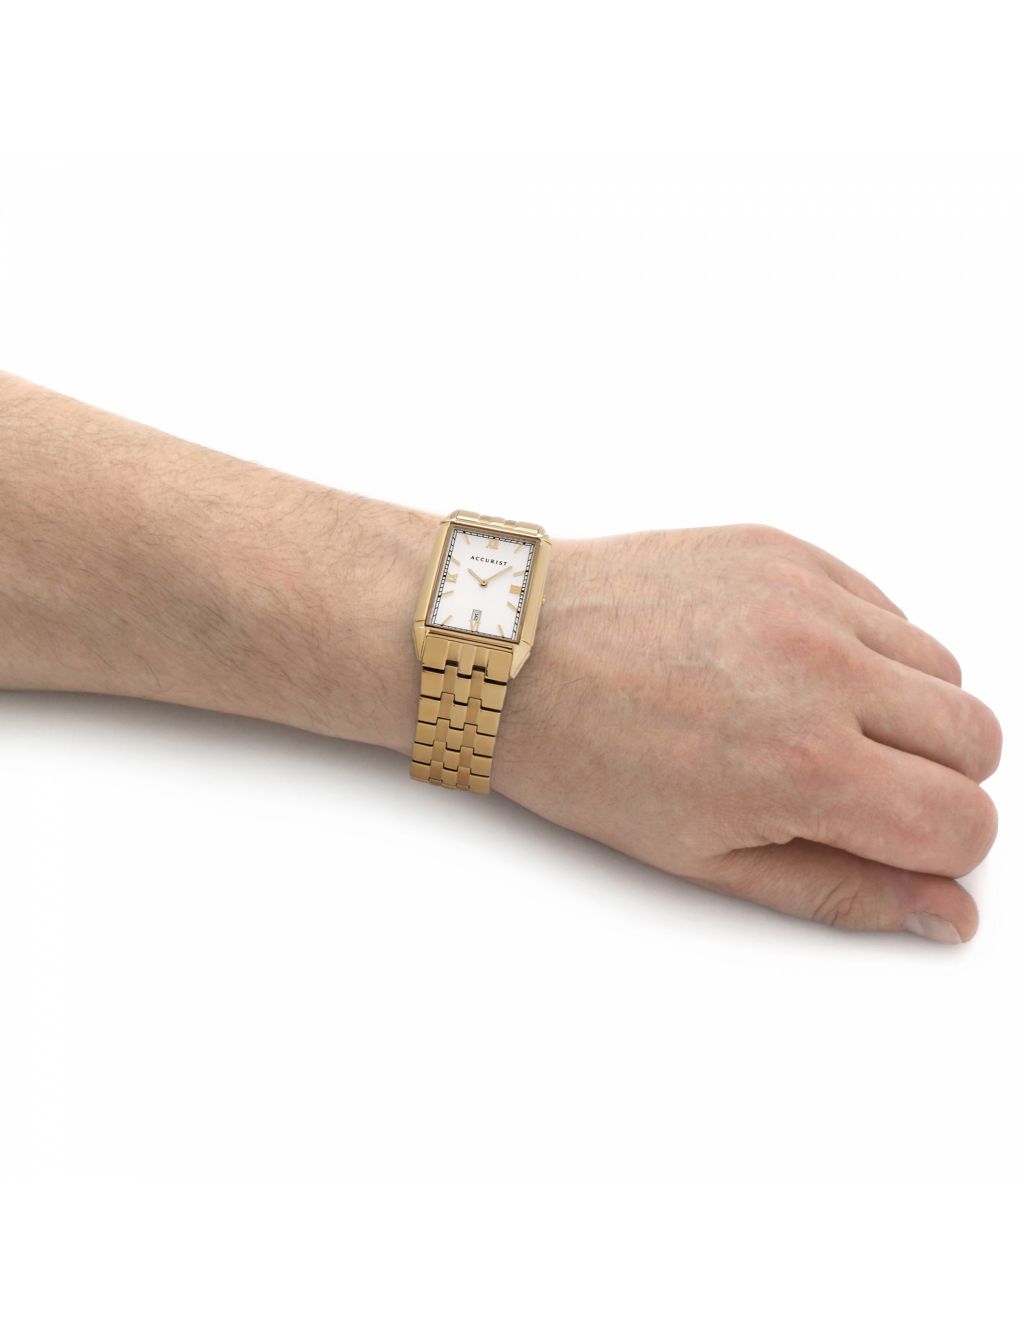 Accurist Gold Watch image 6